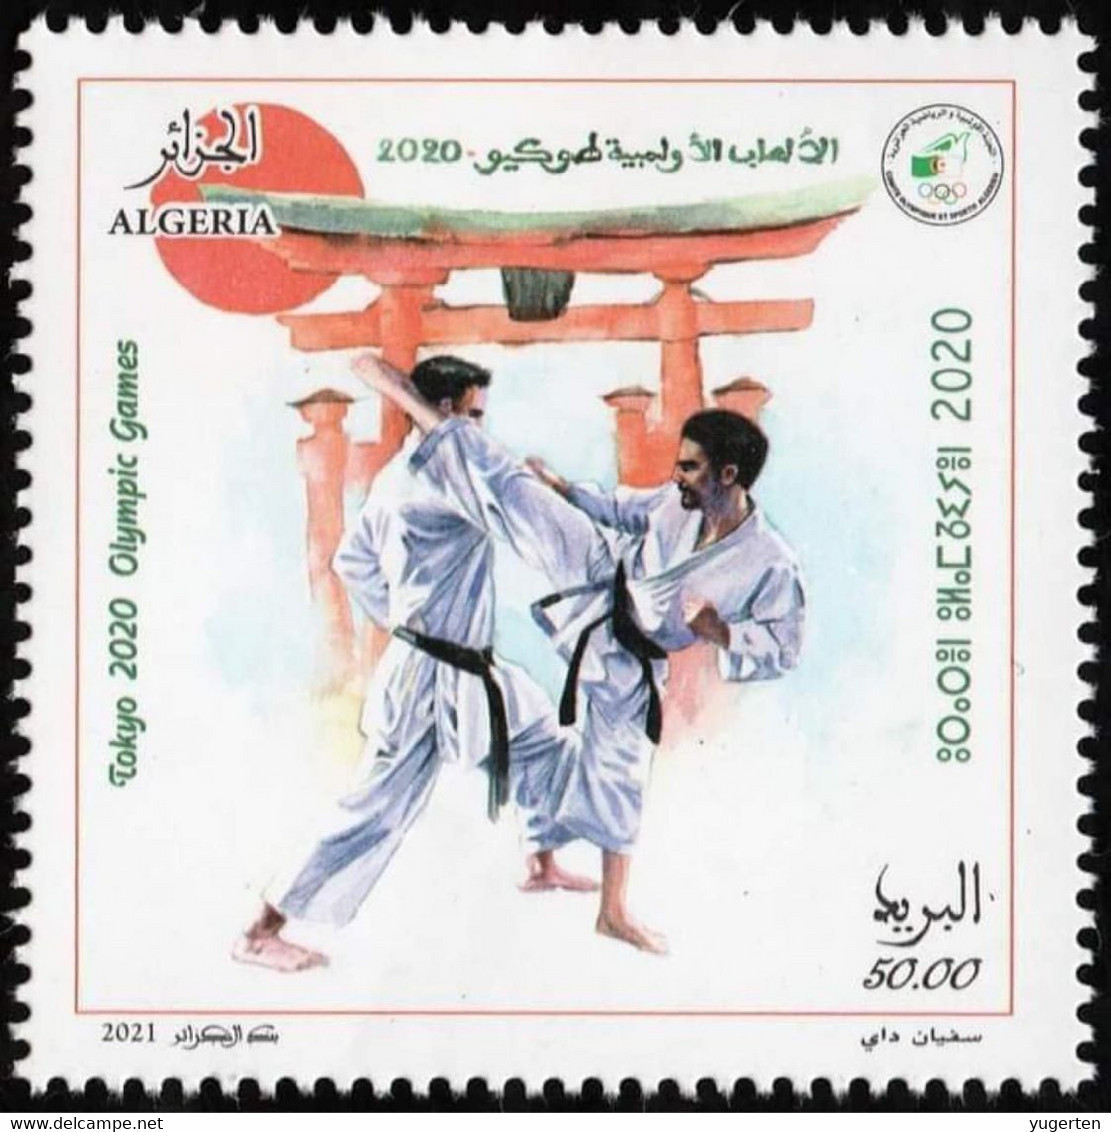 ALGERIA 2021 - 1 V - MNH - Karate - Olympic Games Tokyo JO Olympics Olympische Spiele Jeux Olympiques Japan - Sin Clasificación